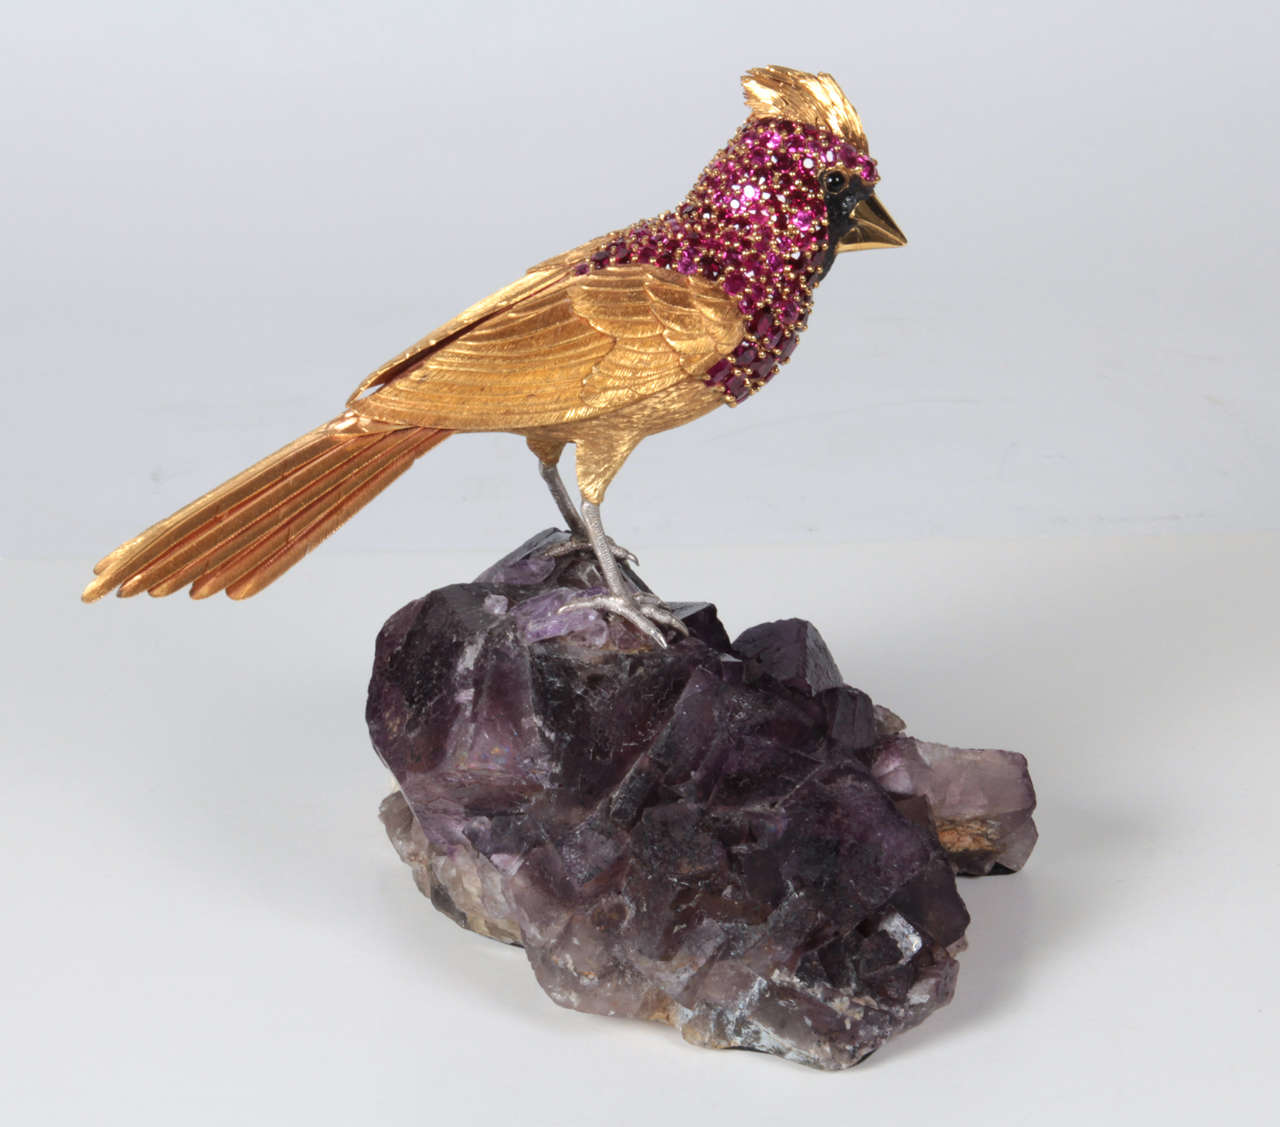 ASPREY & CO. LTD. (founded 1781) London, UK

Important Natural Ruby Gem Set 18K Gold Cardinal Bird Sculpture   1980 

Finely chased and chiseled 18K yellow and white gold realistically rendered sculpture of a Cardinal bird set with 
75+ carats